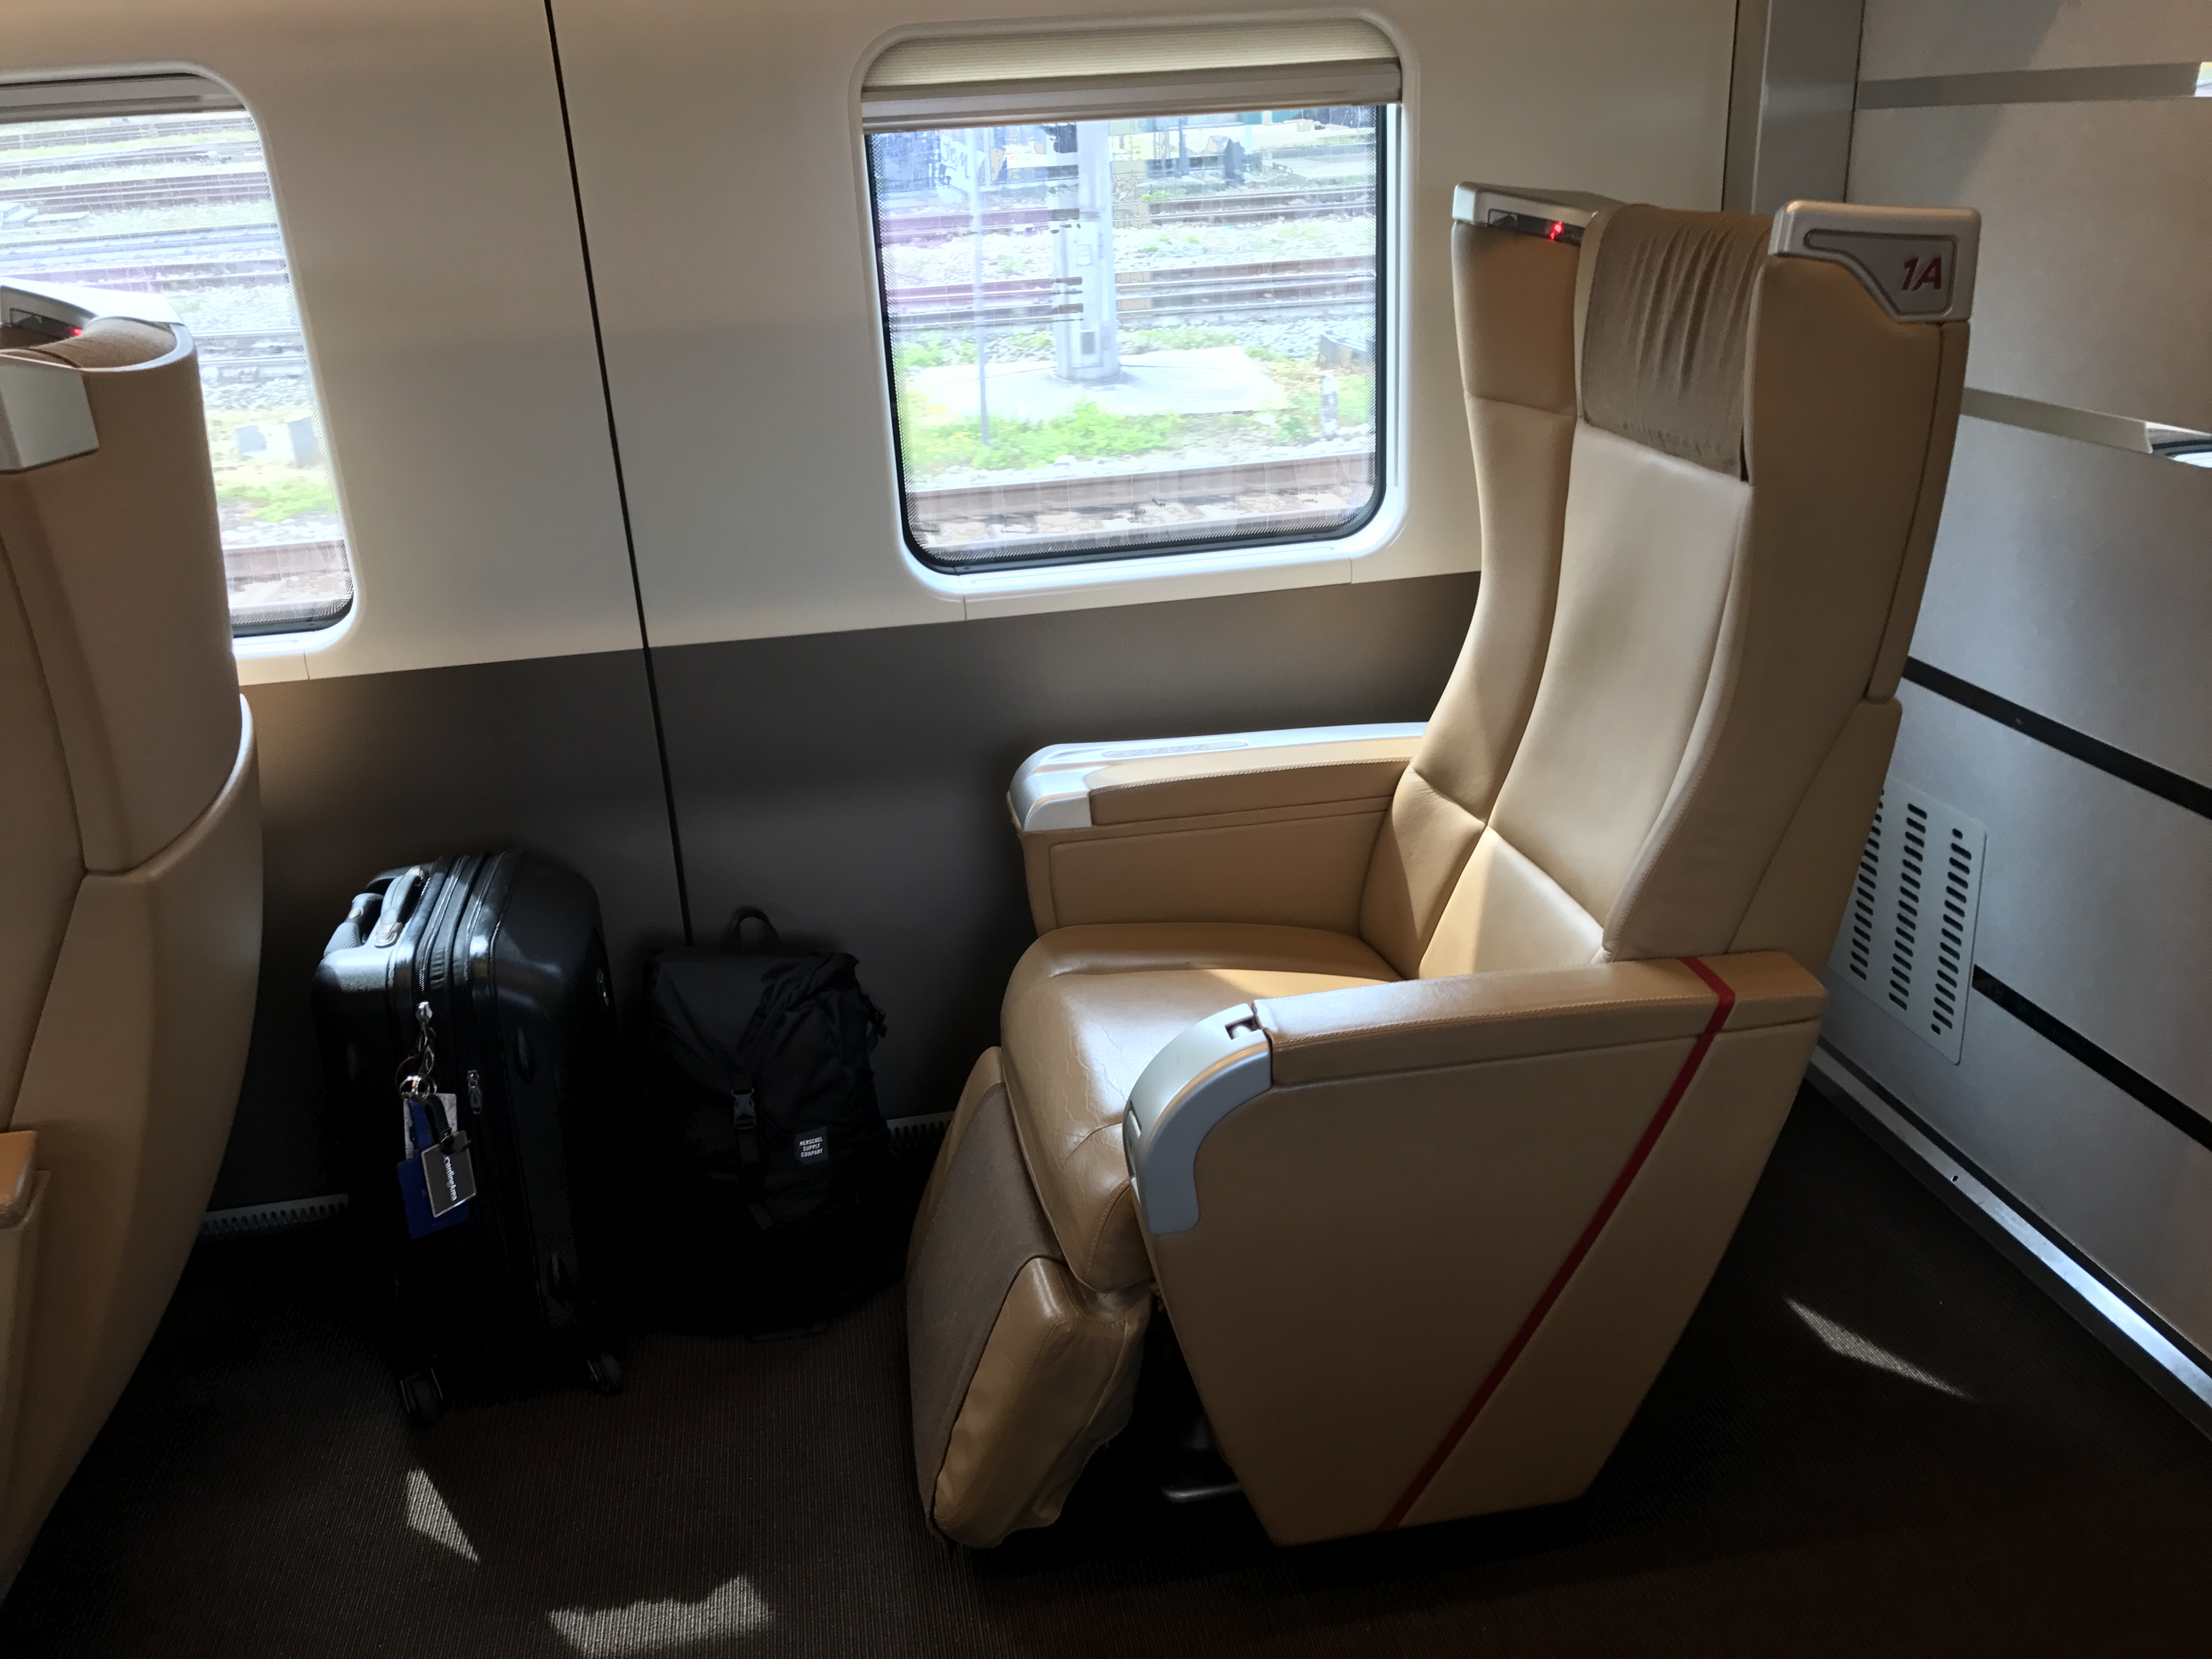 Trenitalia Executive Class New Interior with partly extended legrest